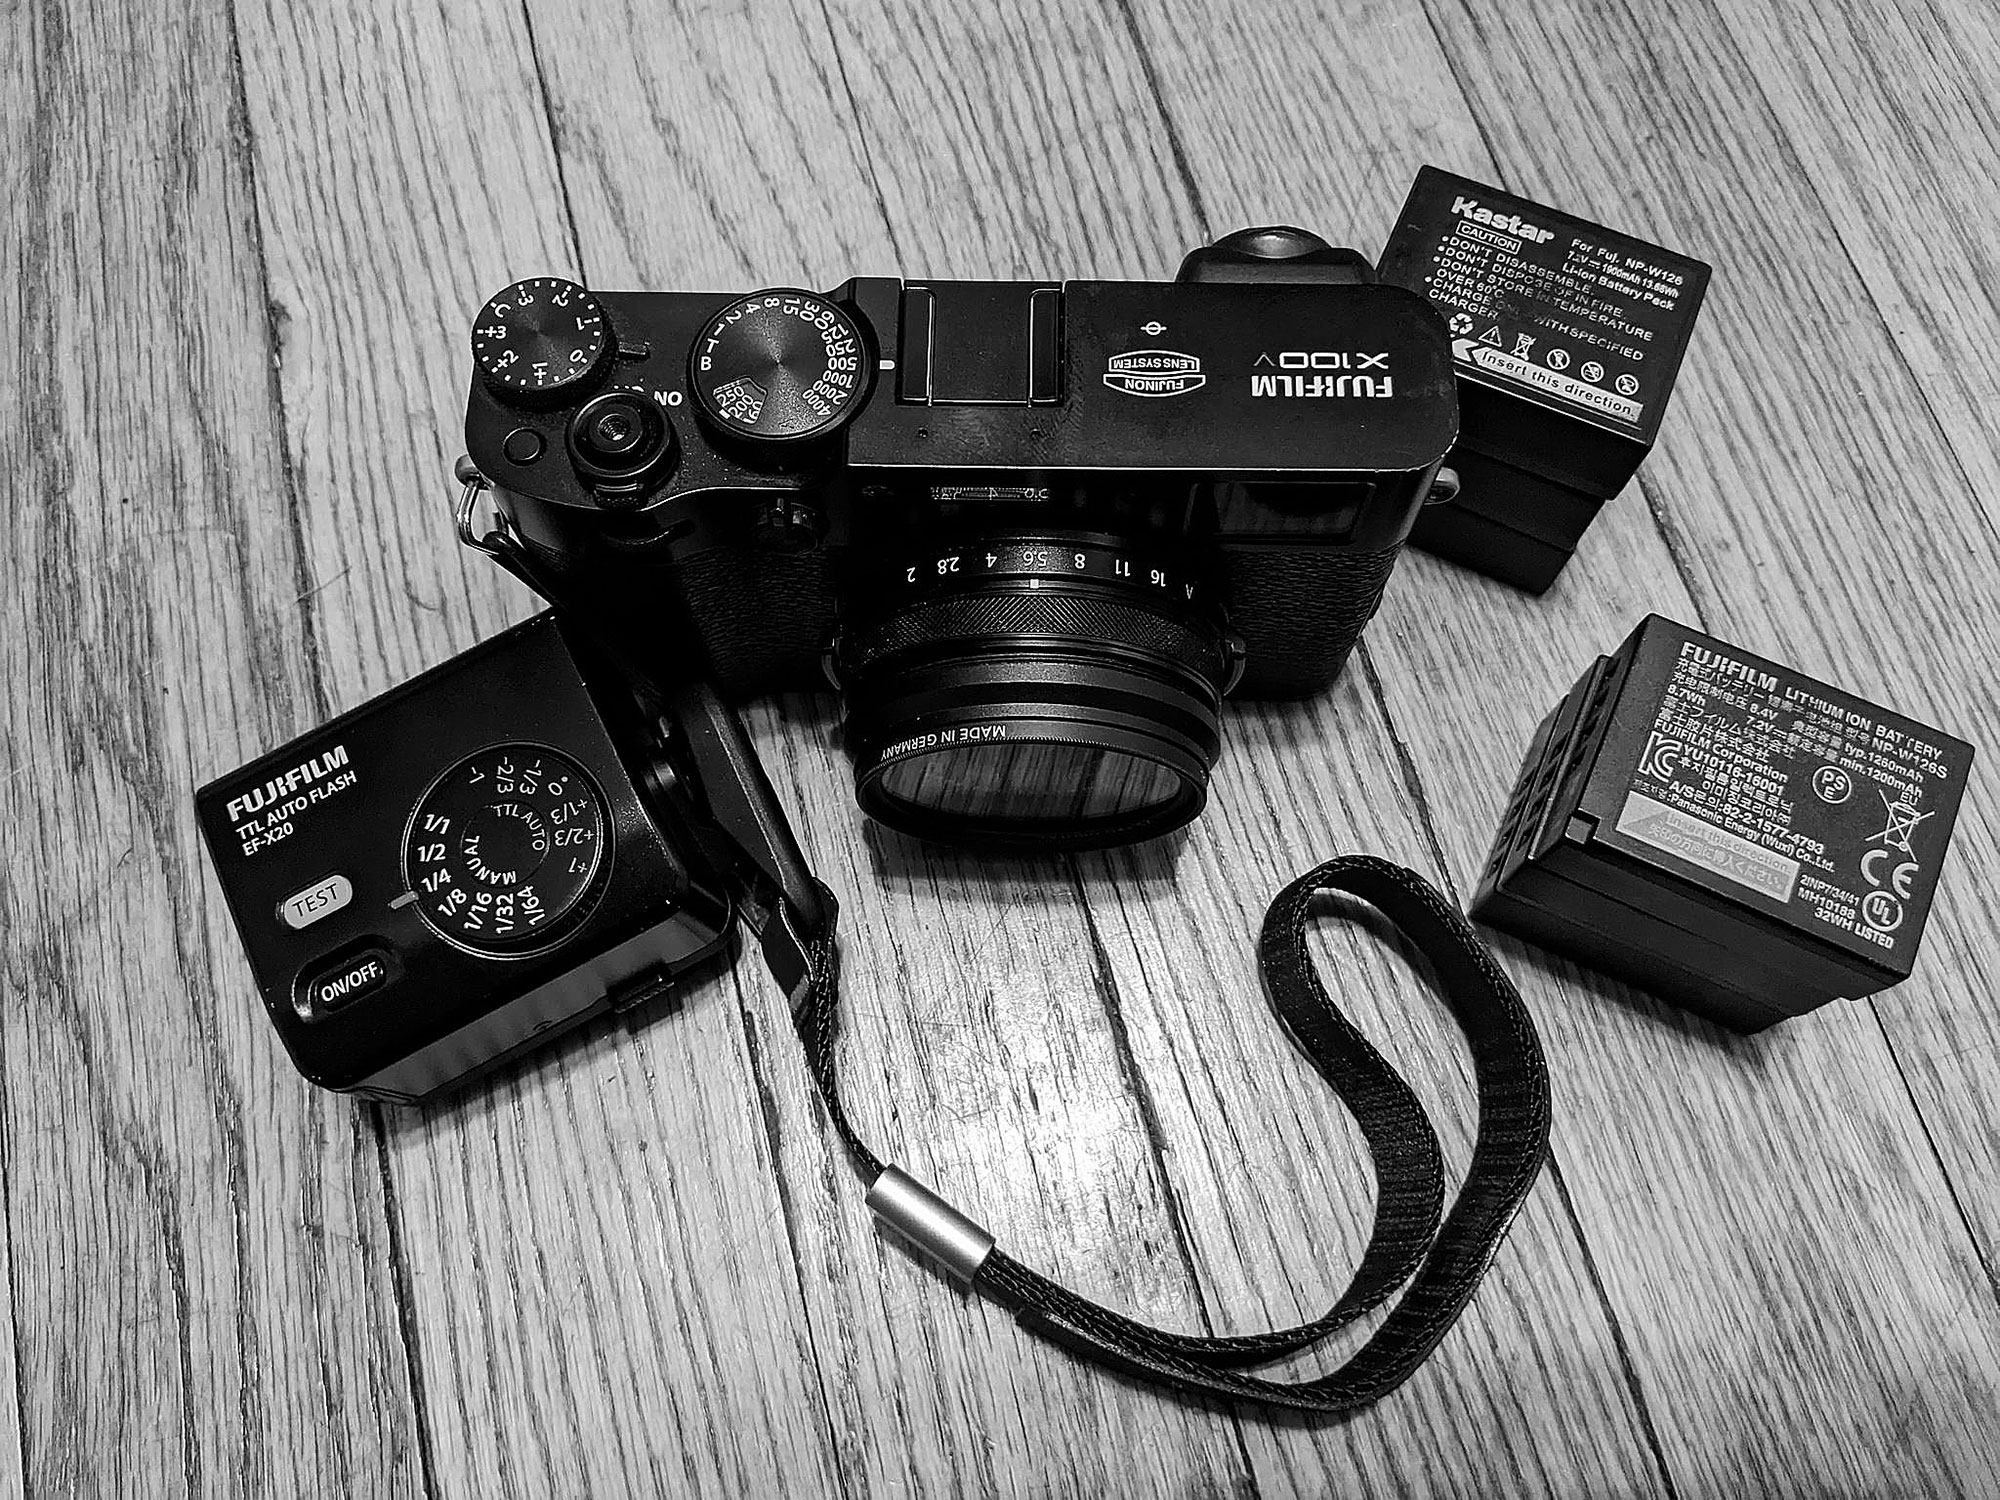 6 Months into One Camera One Lens with the X100V